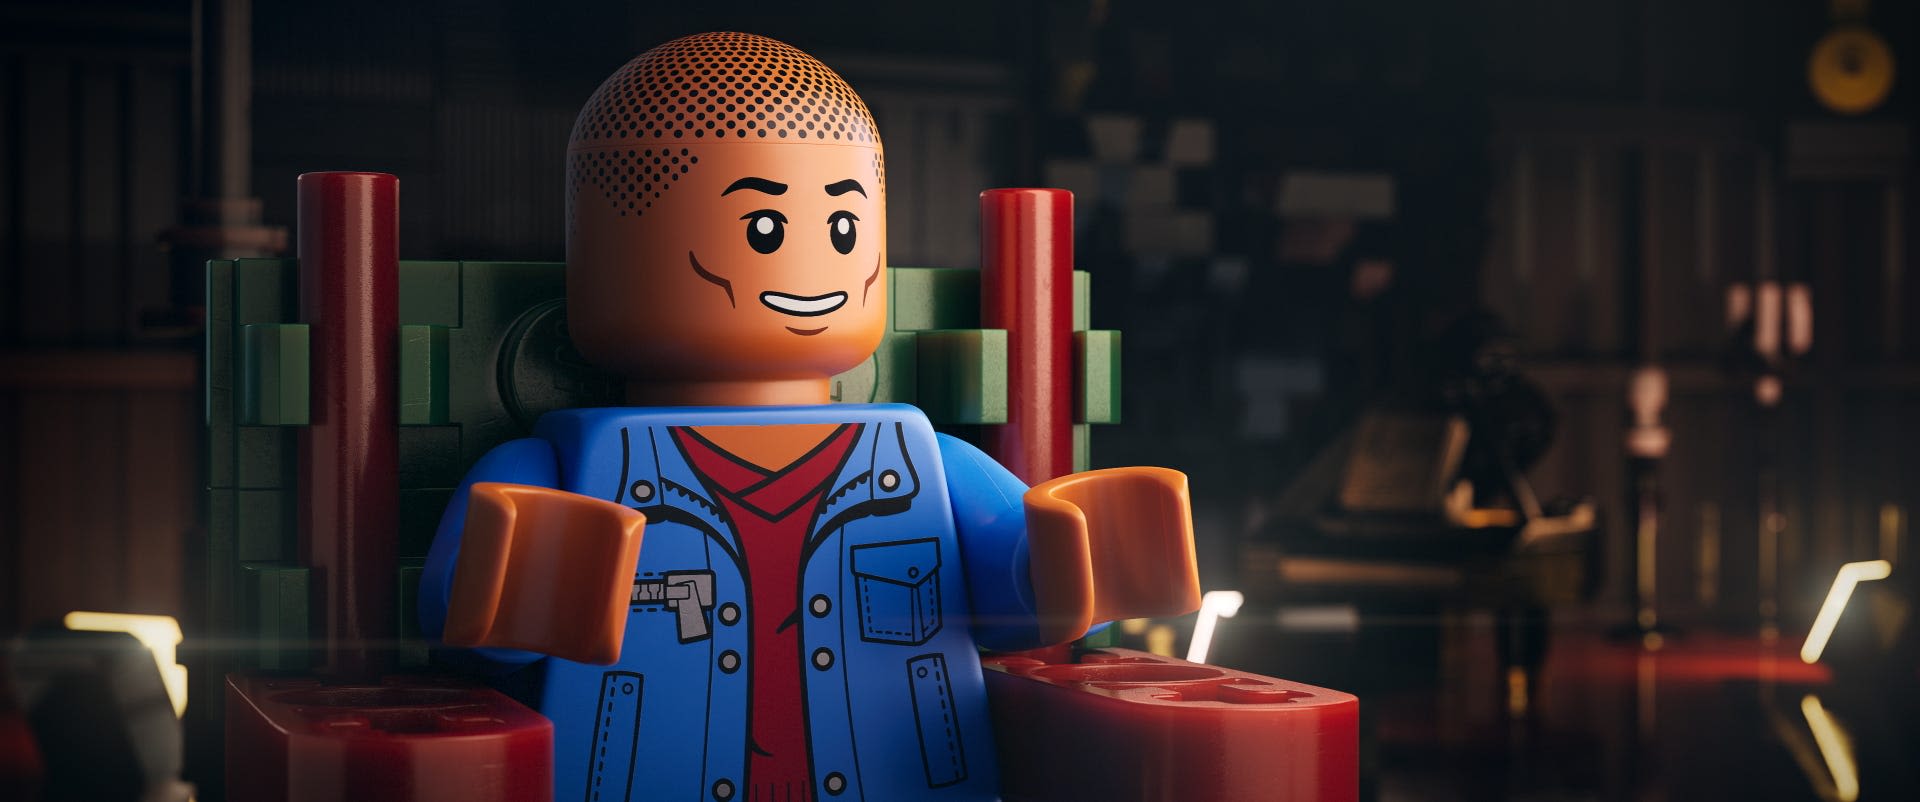 'Piece by Piece' trailer tells Pharrell Williams' story in LEGO form: 'A new type of film'